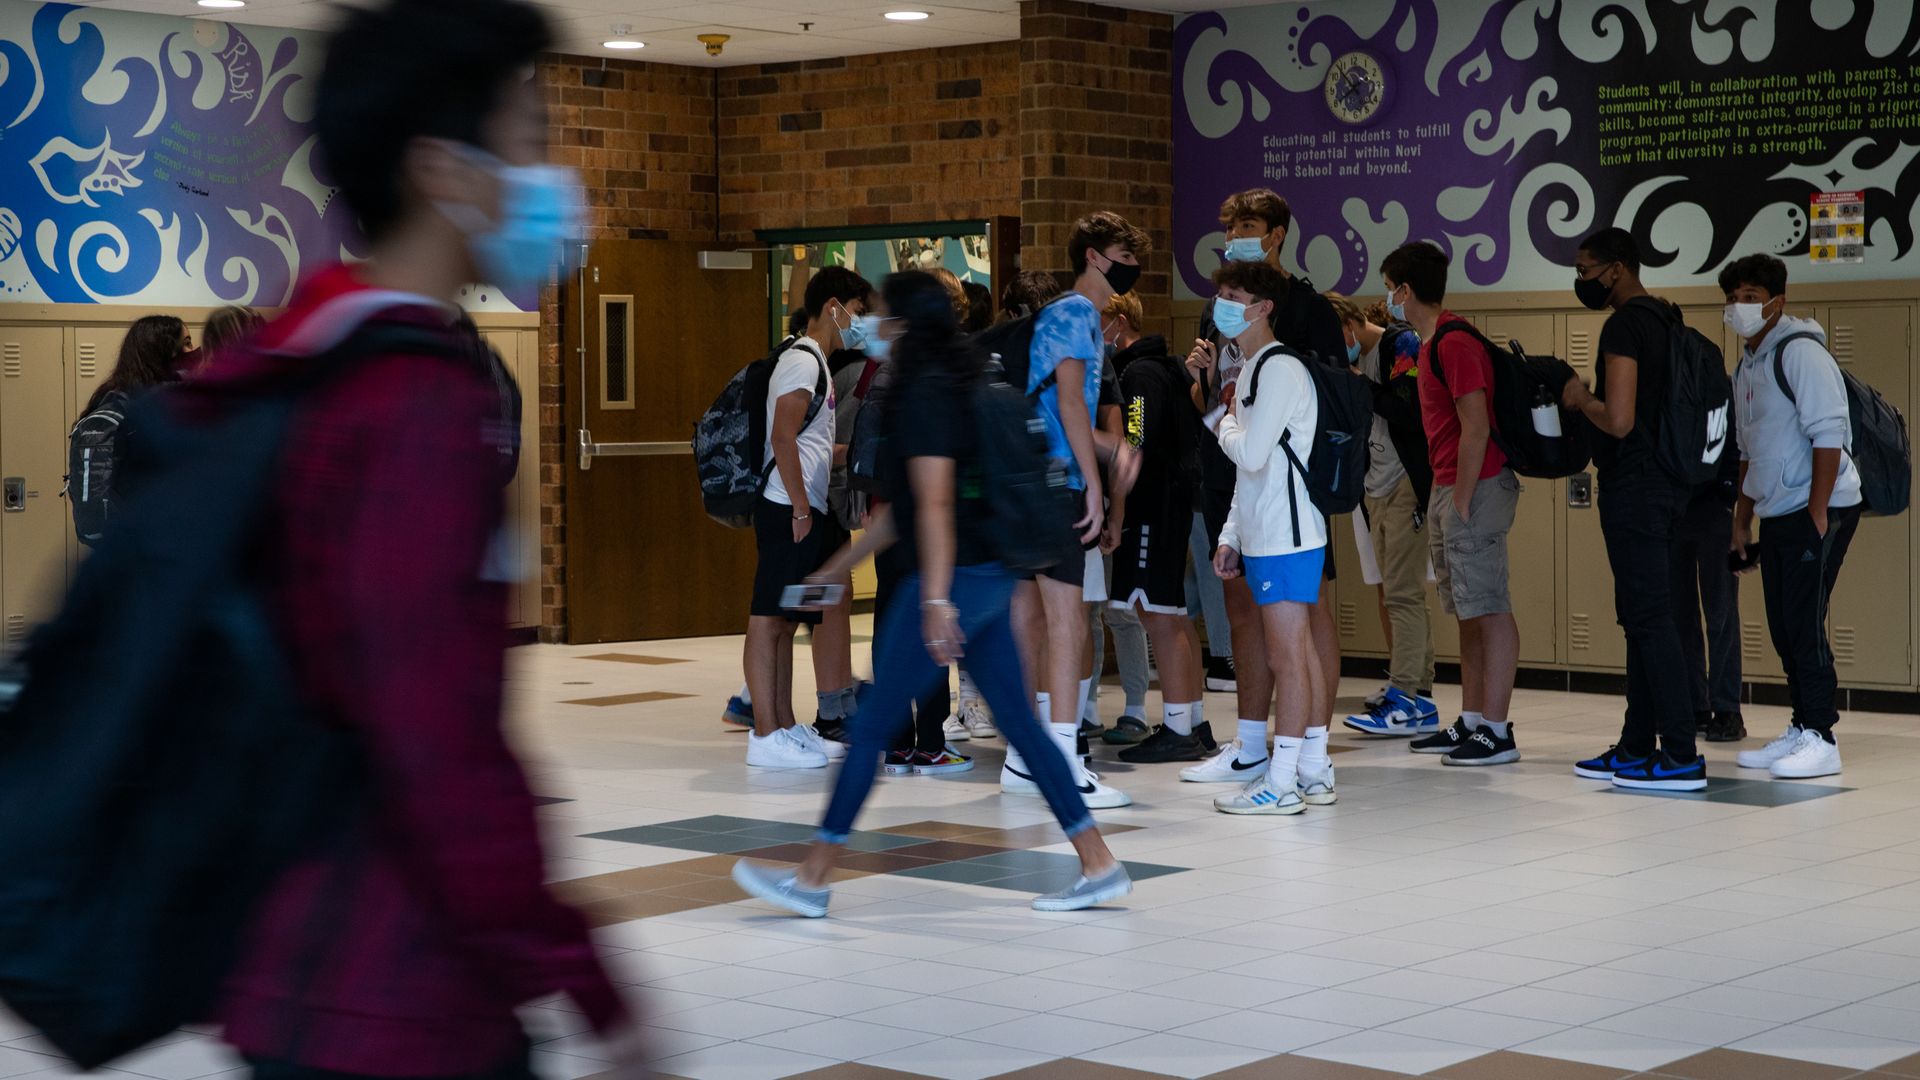 Students walk through the hallway at a high school during the first day of classes in Novi, Michigan, U.S., on Tuesday, Sept. 7 2021.